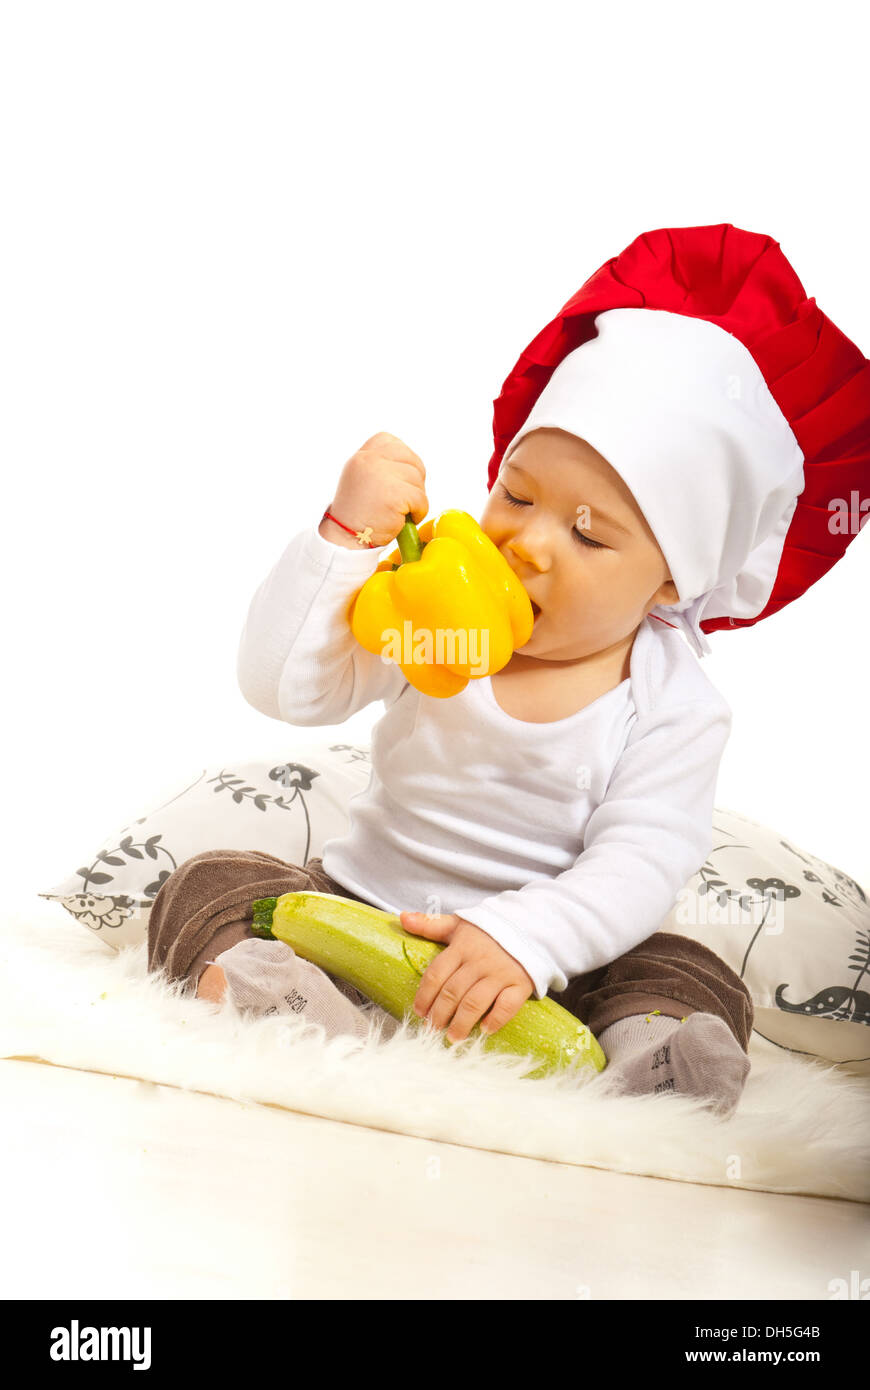 Chef baby boy eating bell pepper and sitting down Stock Photo